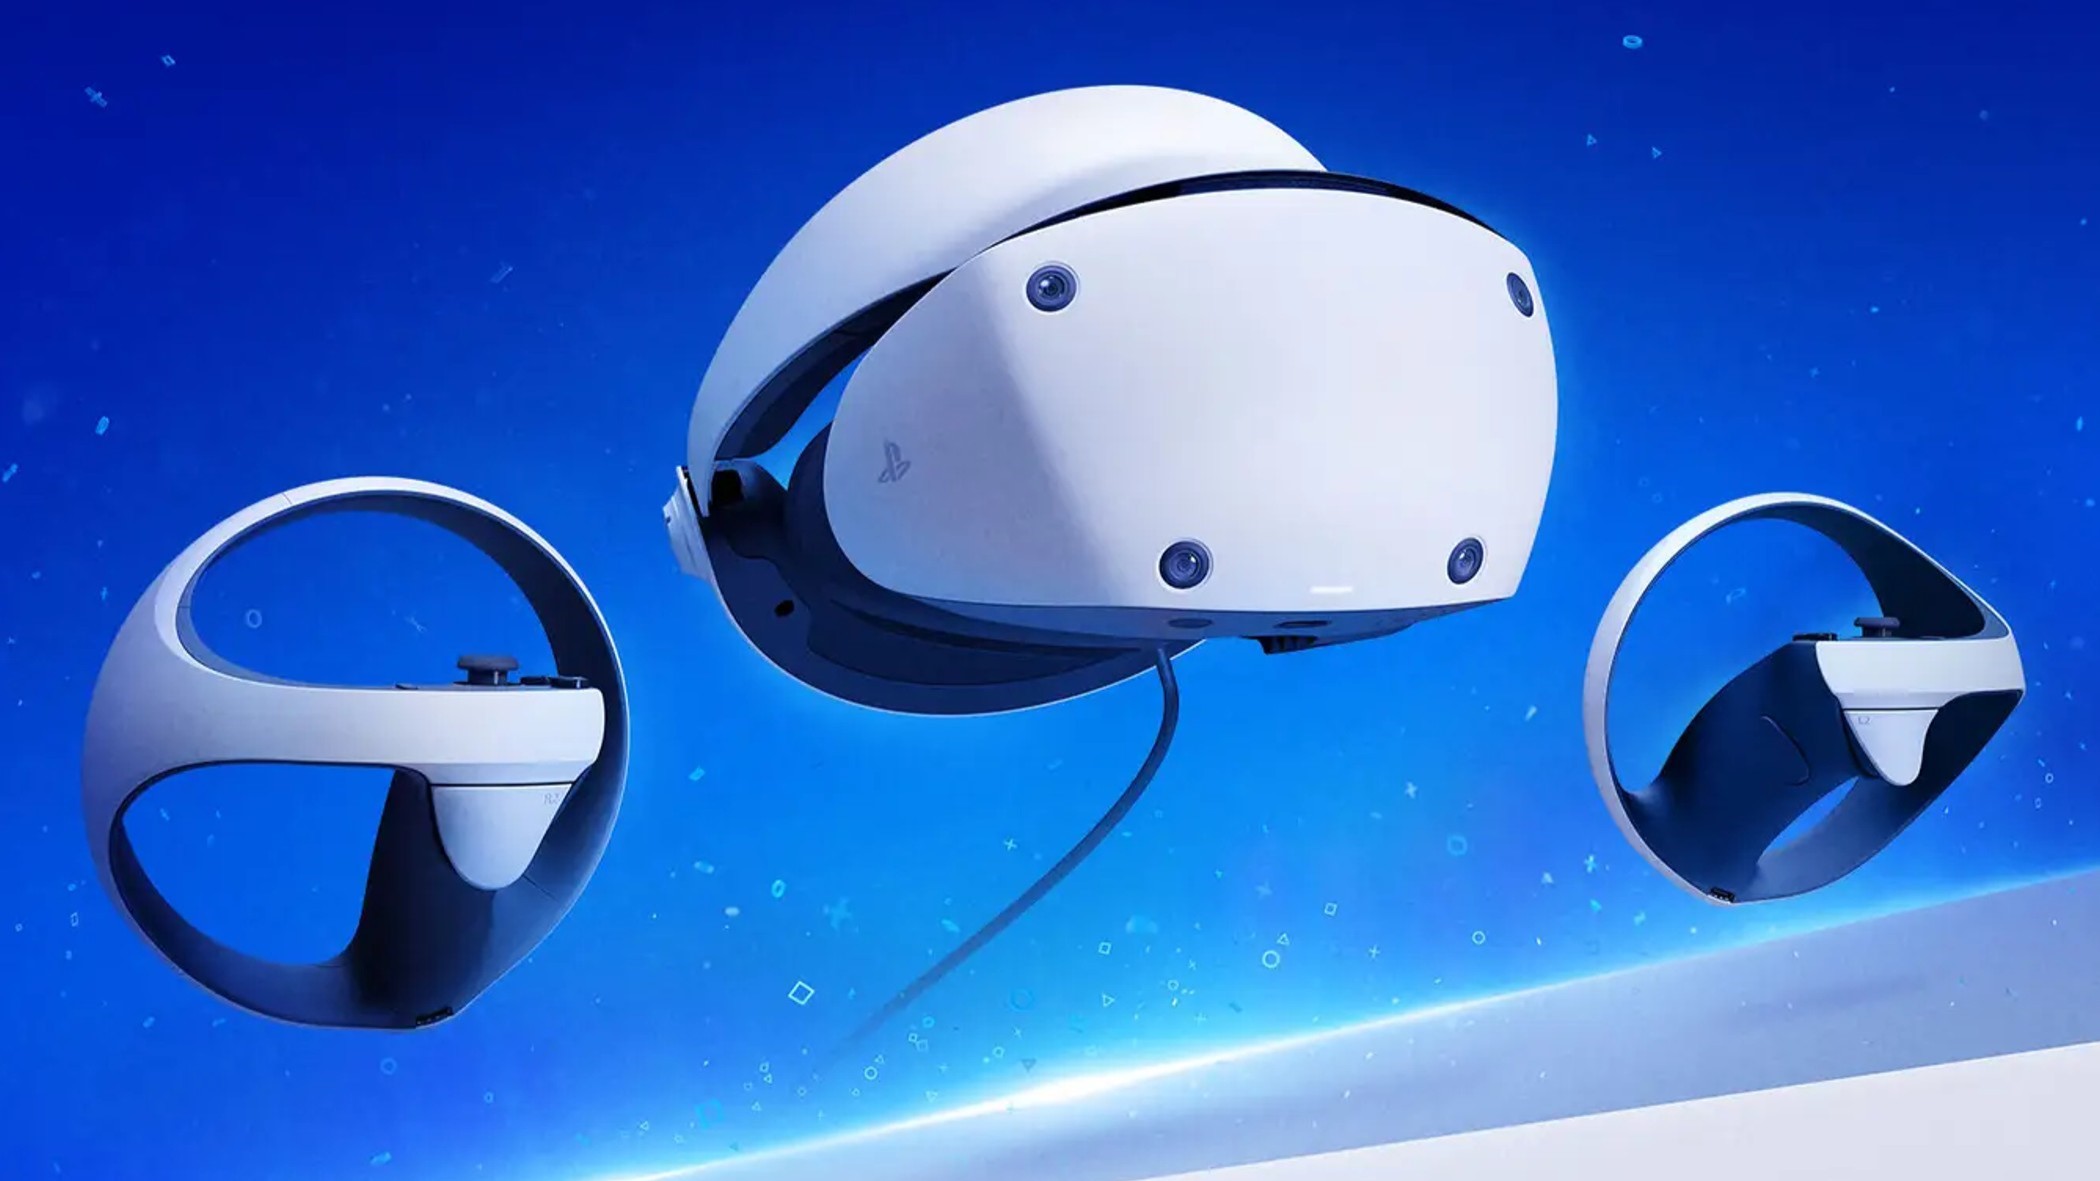 Sony might bring PlayStation VR to the PC